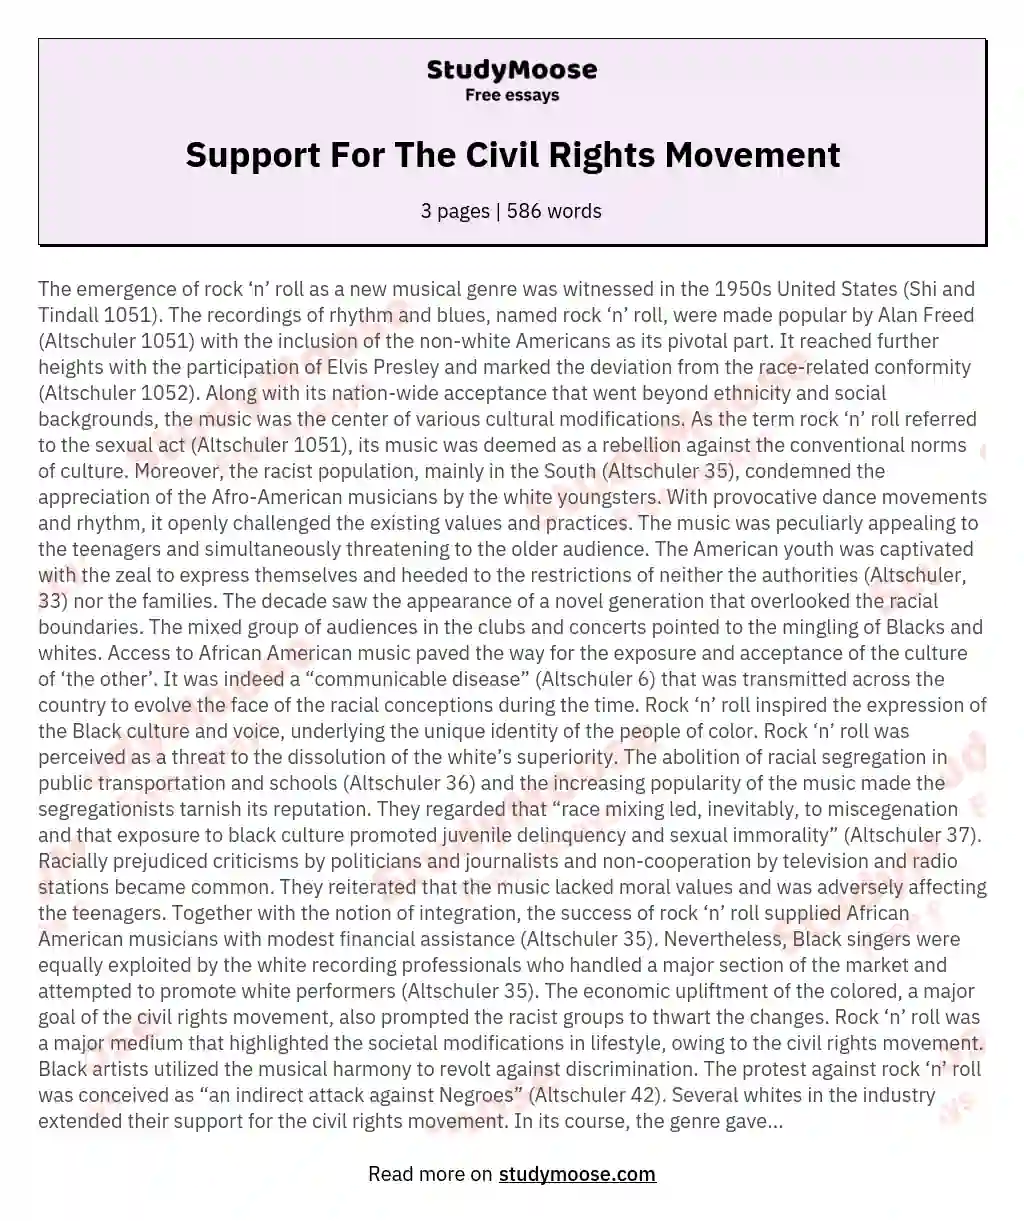 Support For The Civil Rights Movement essay